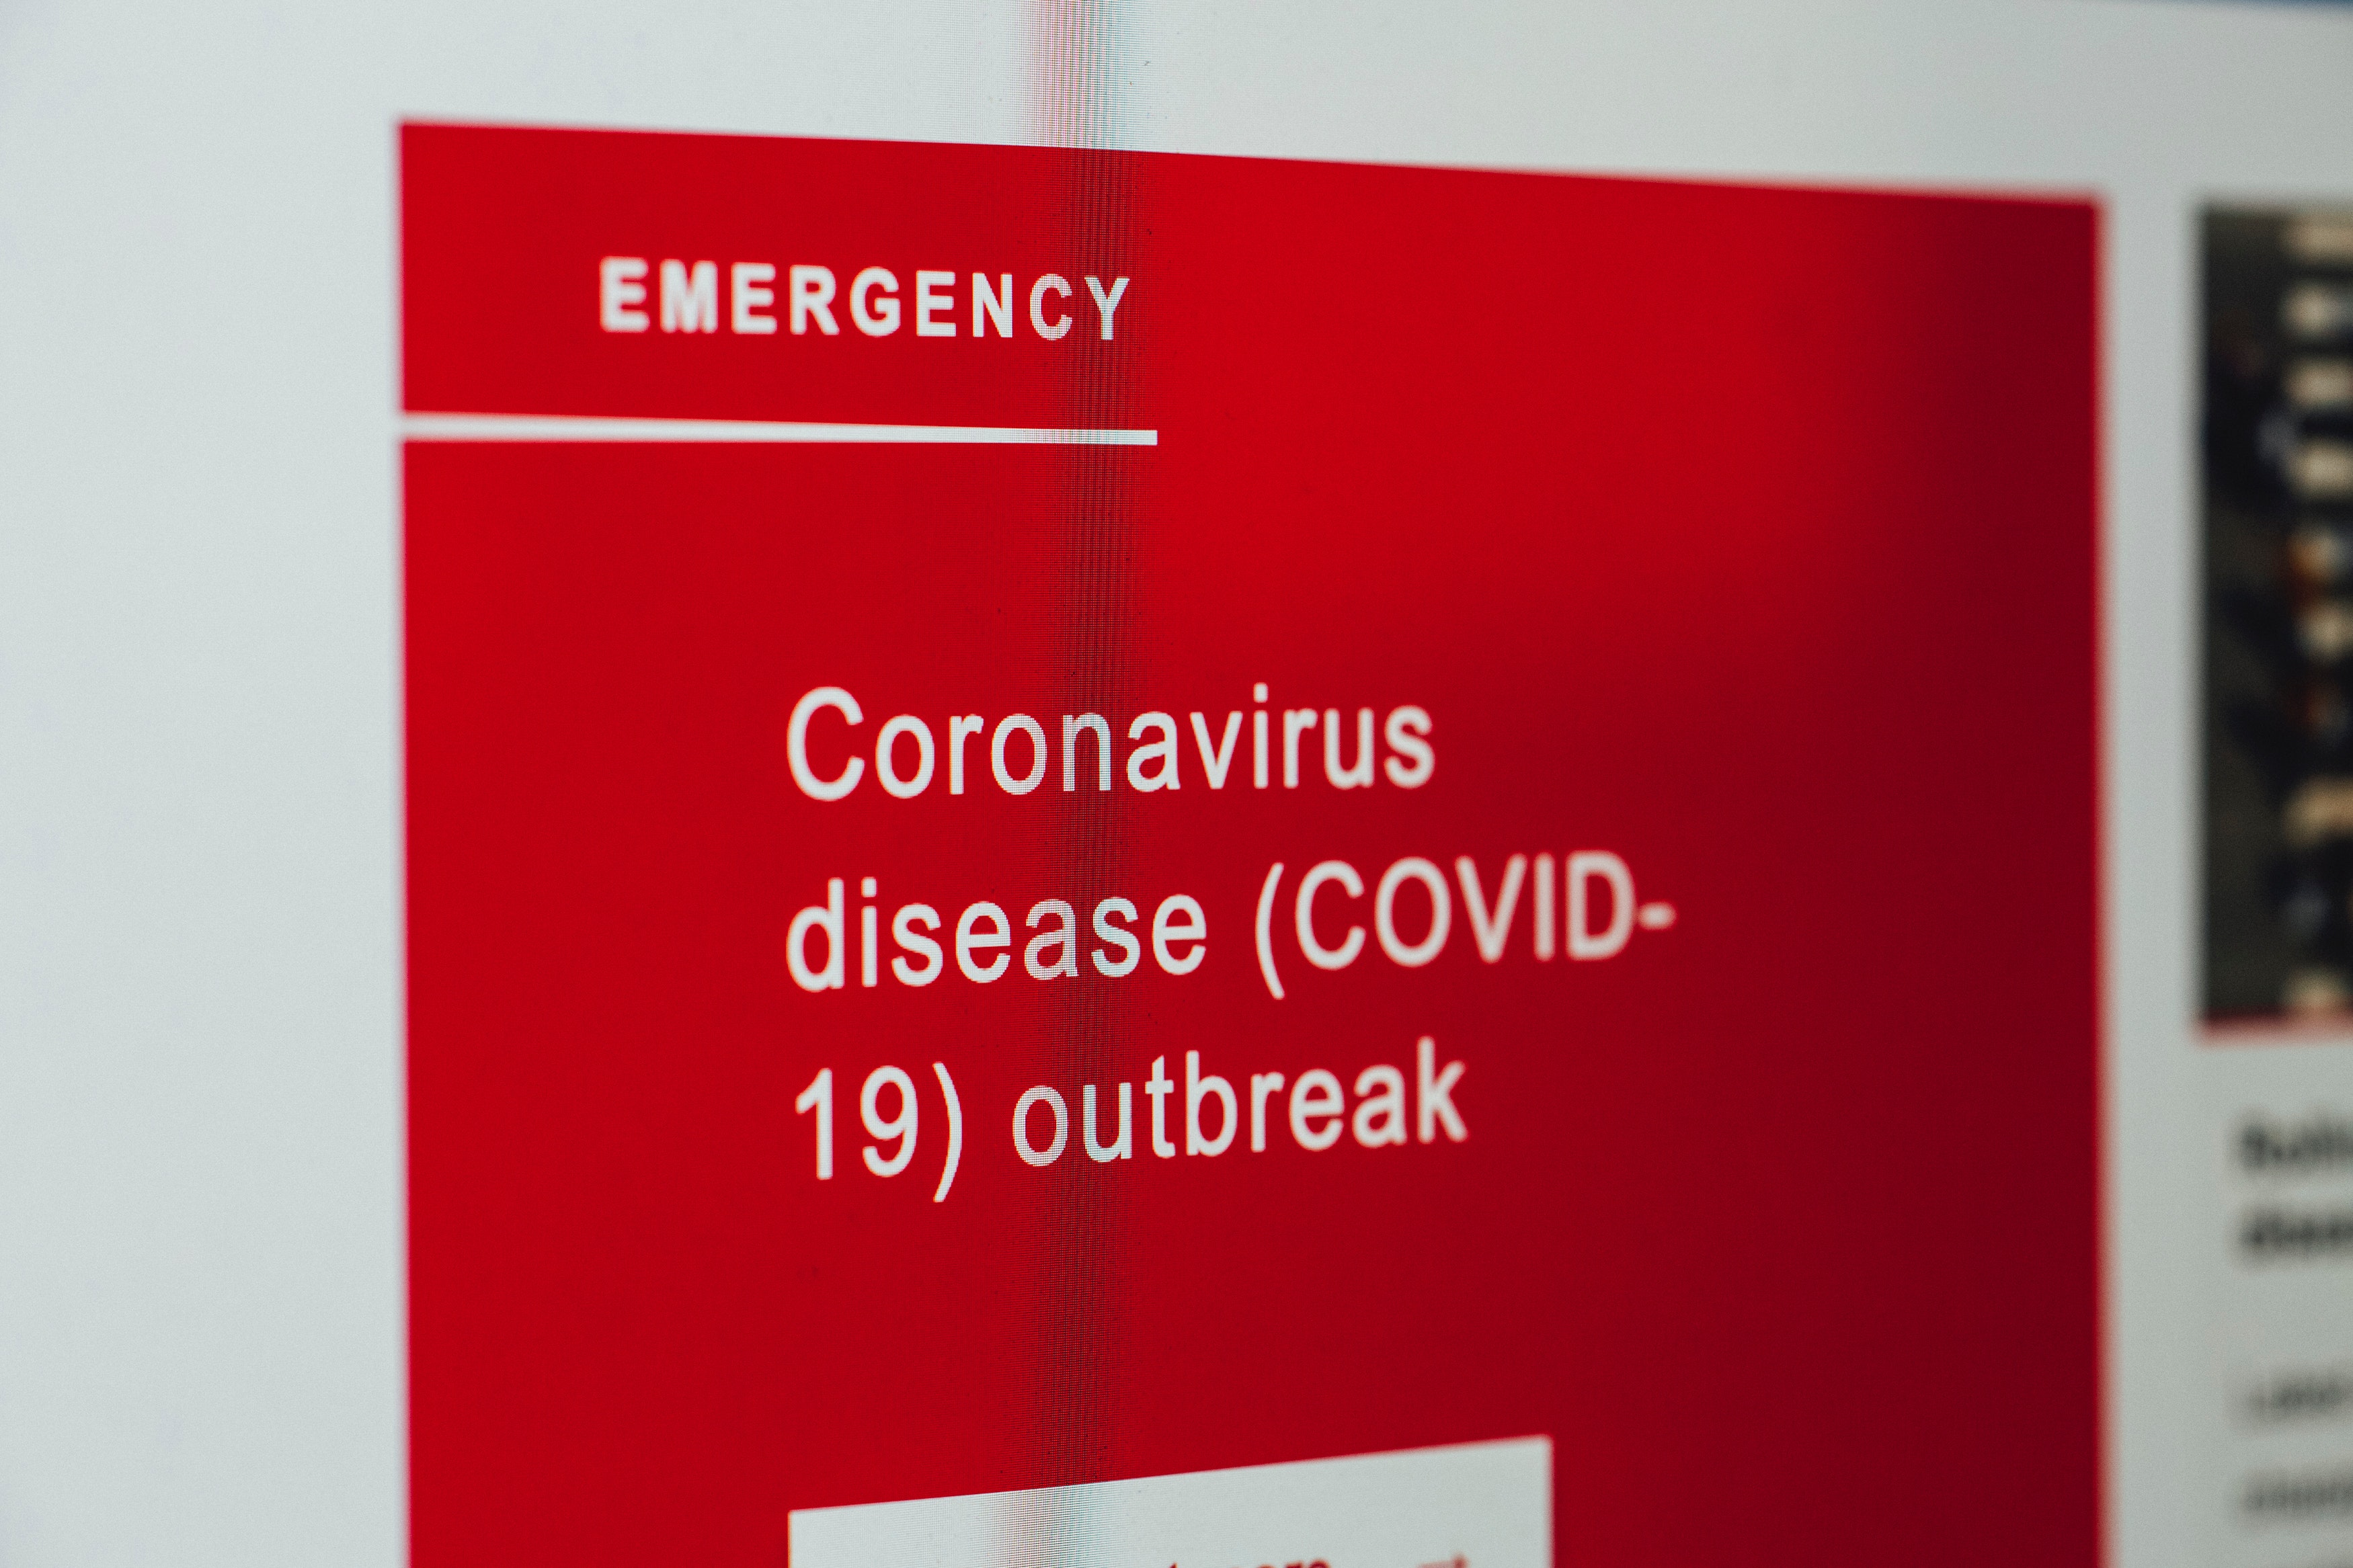 Brand Reputation During the Covid19 crisis